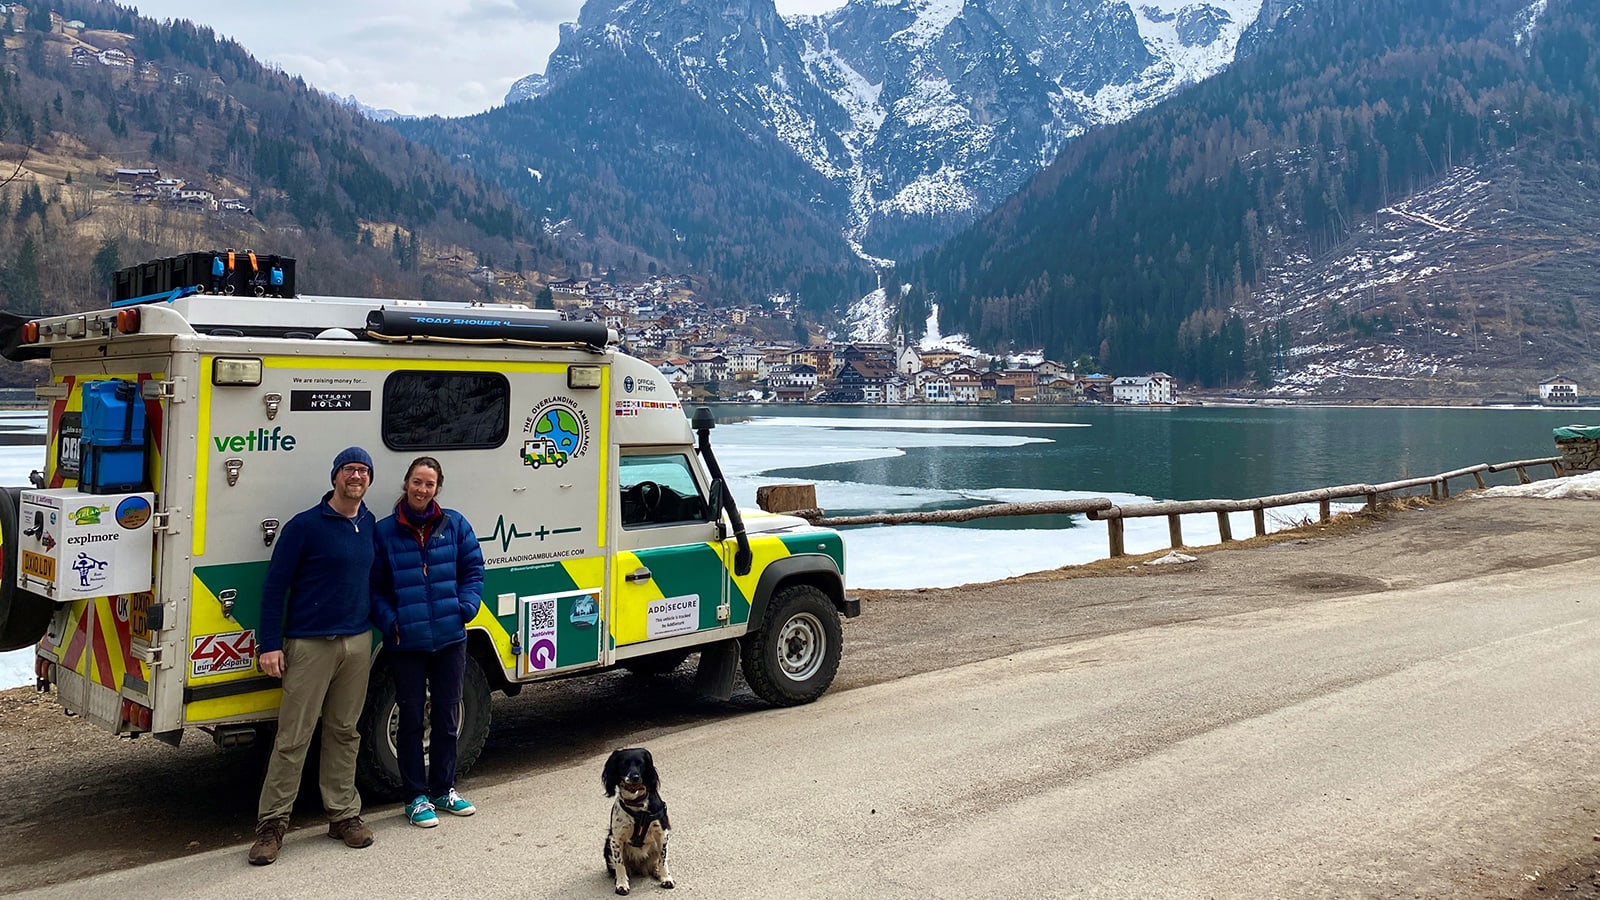 This duo travels the world in an ambulance..what is the reason?